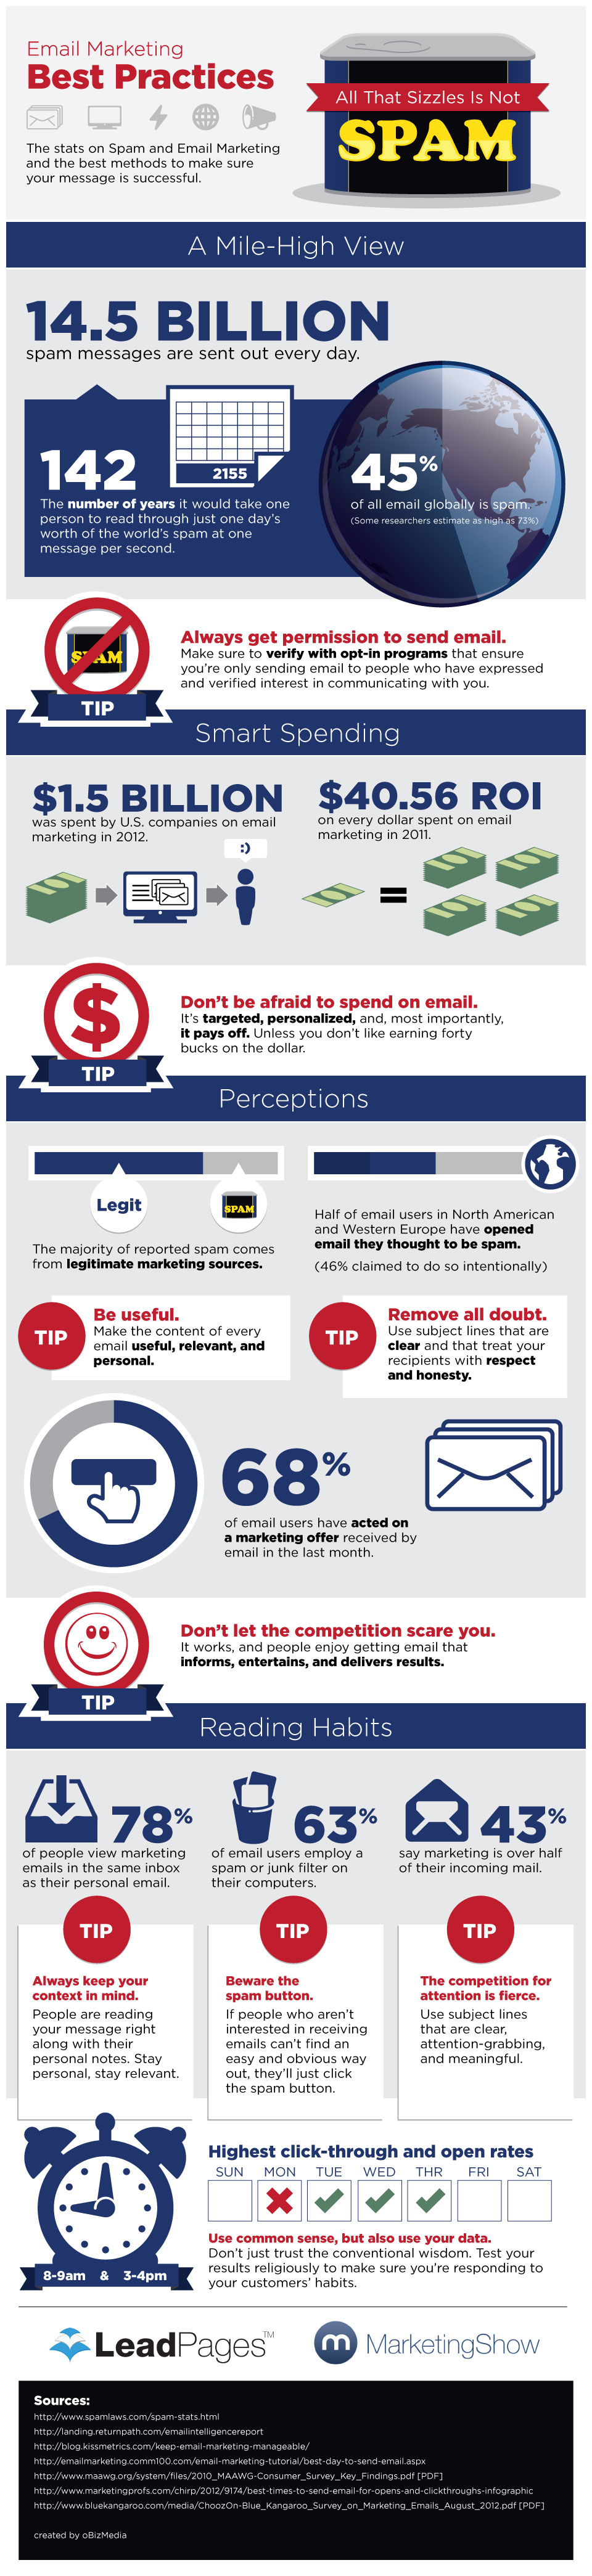 Email marketing best practices infographic